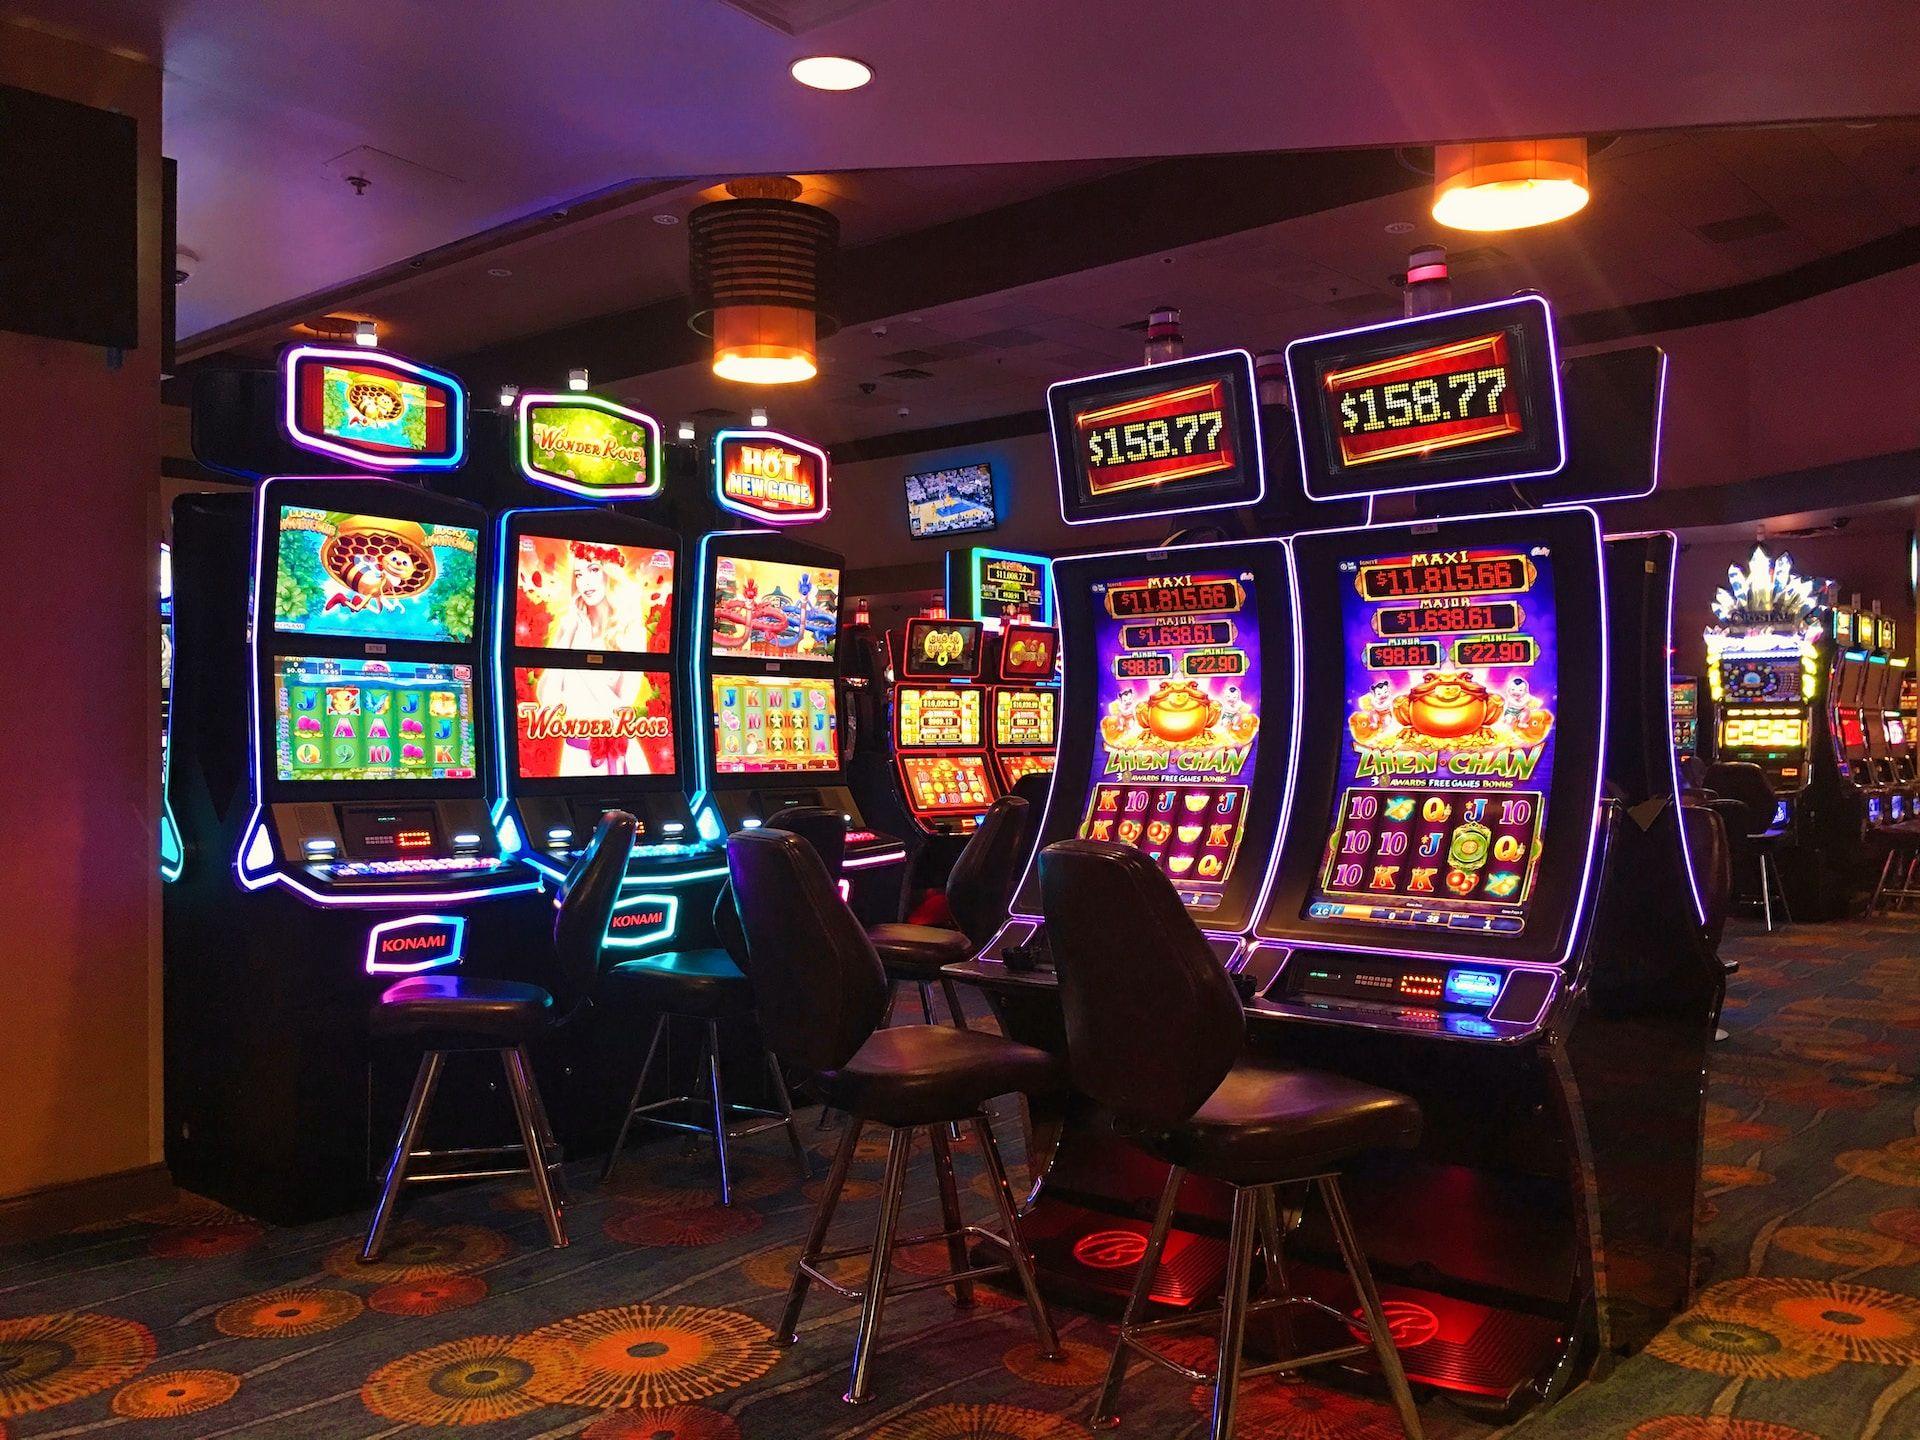 The world of Novoline casinos: An in-depth look at their games, features and popularity